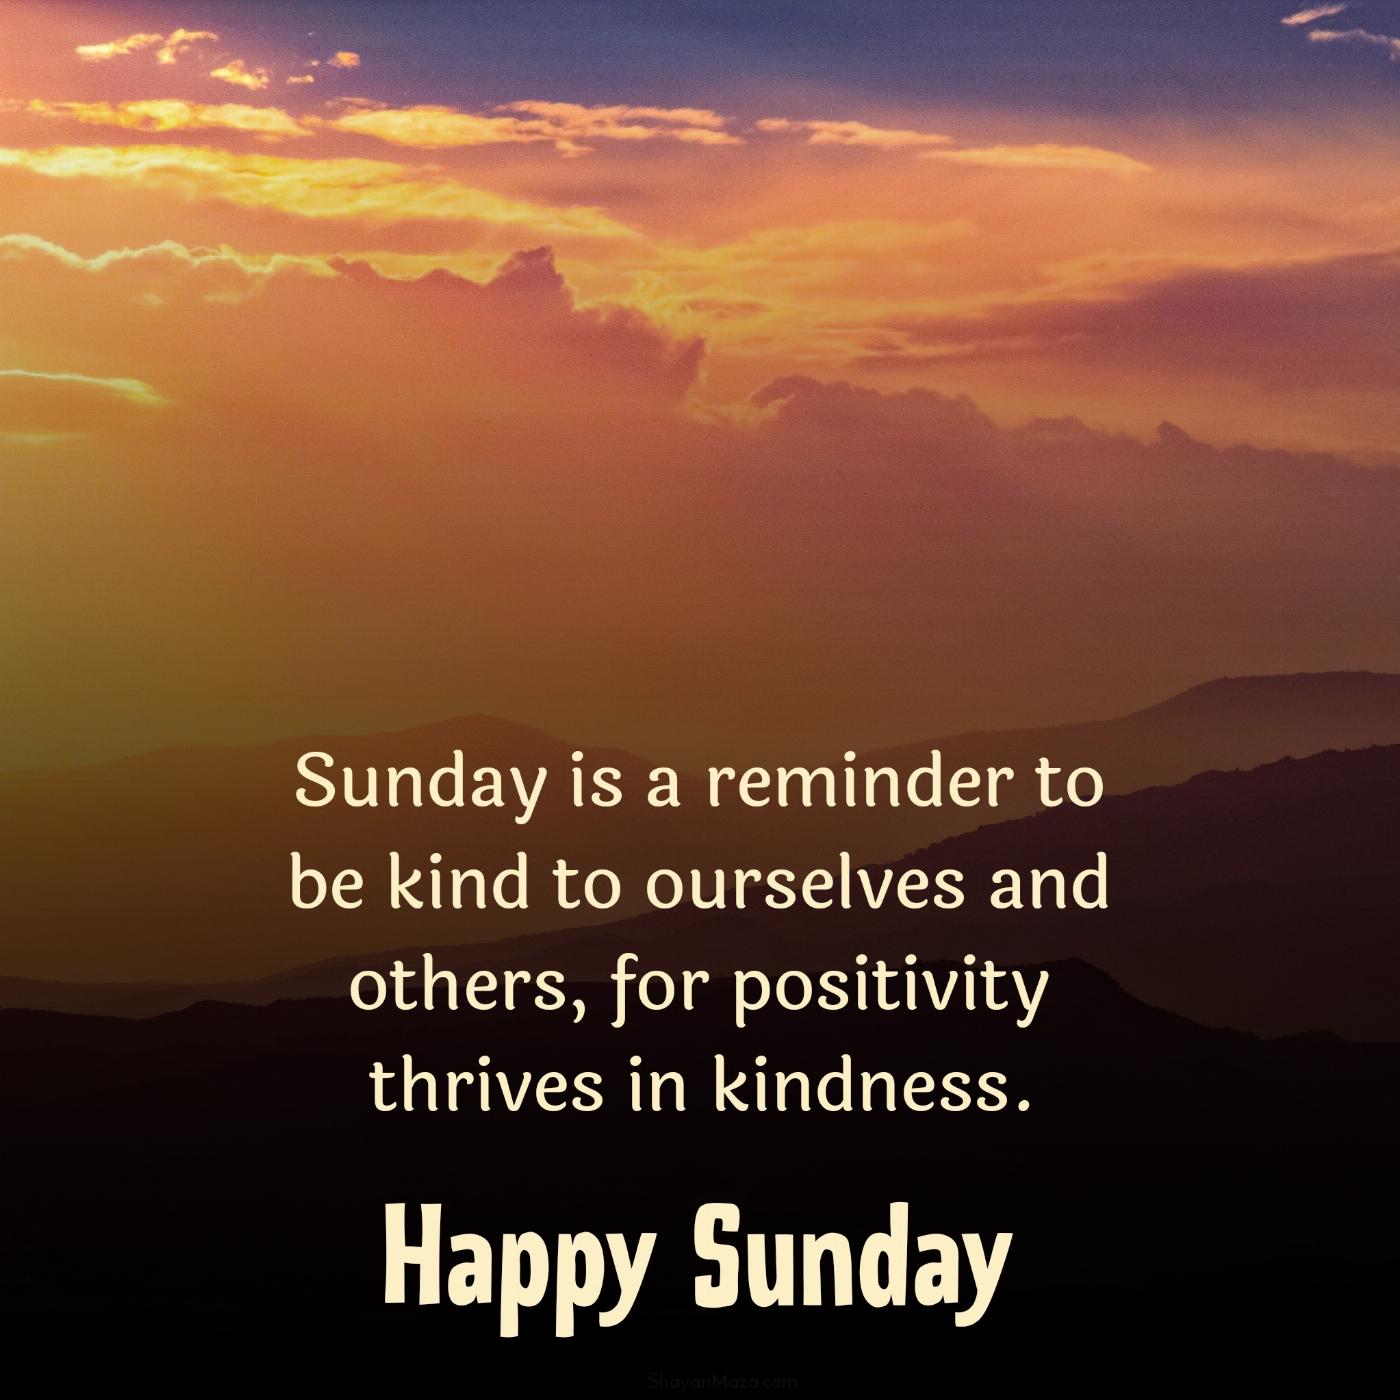 Sunday is a reminder to be kind to ourselves and others